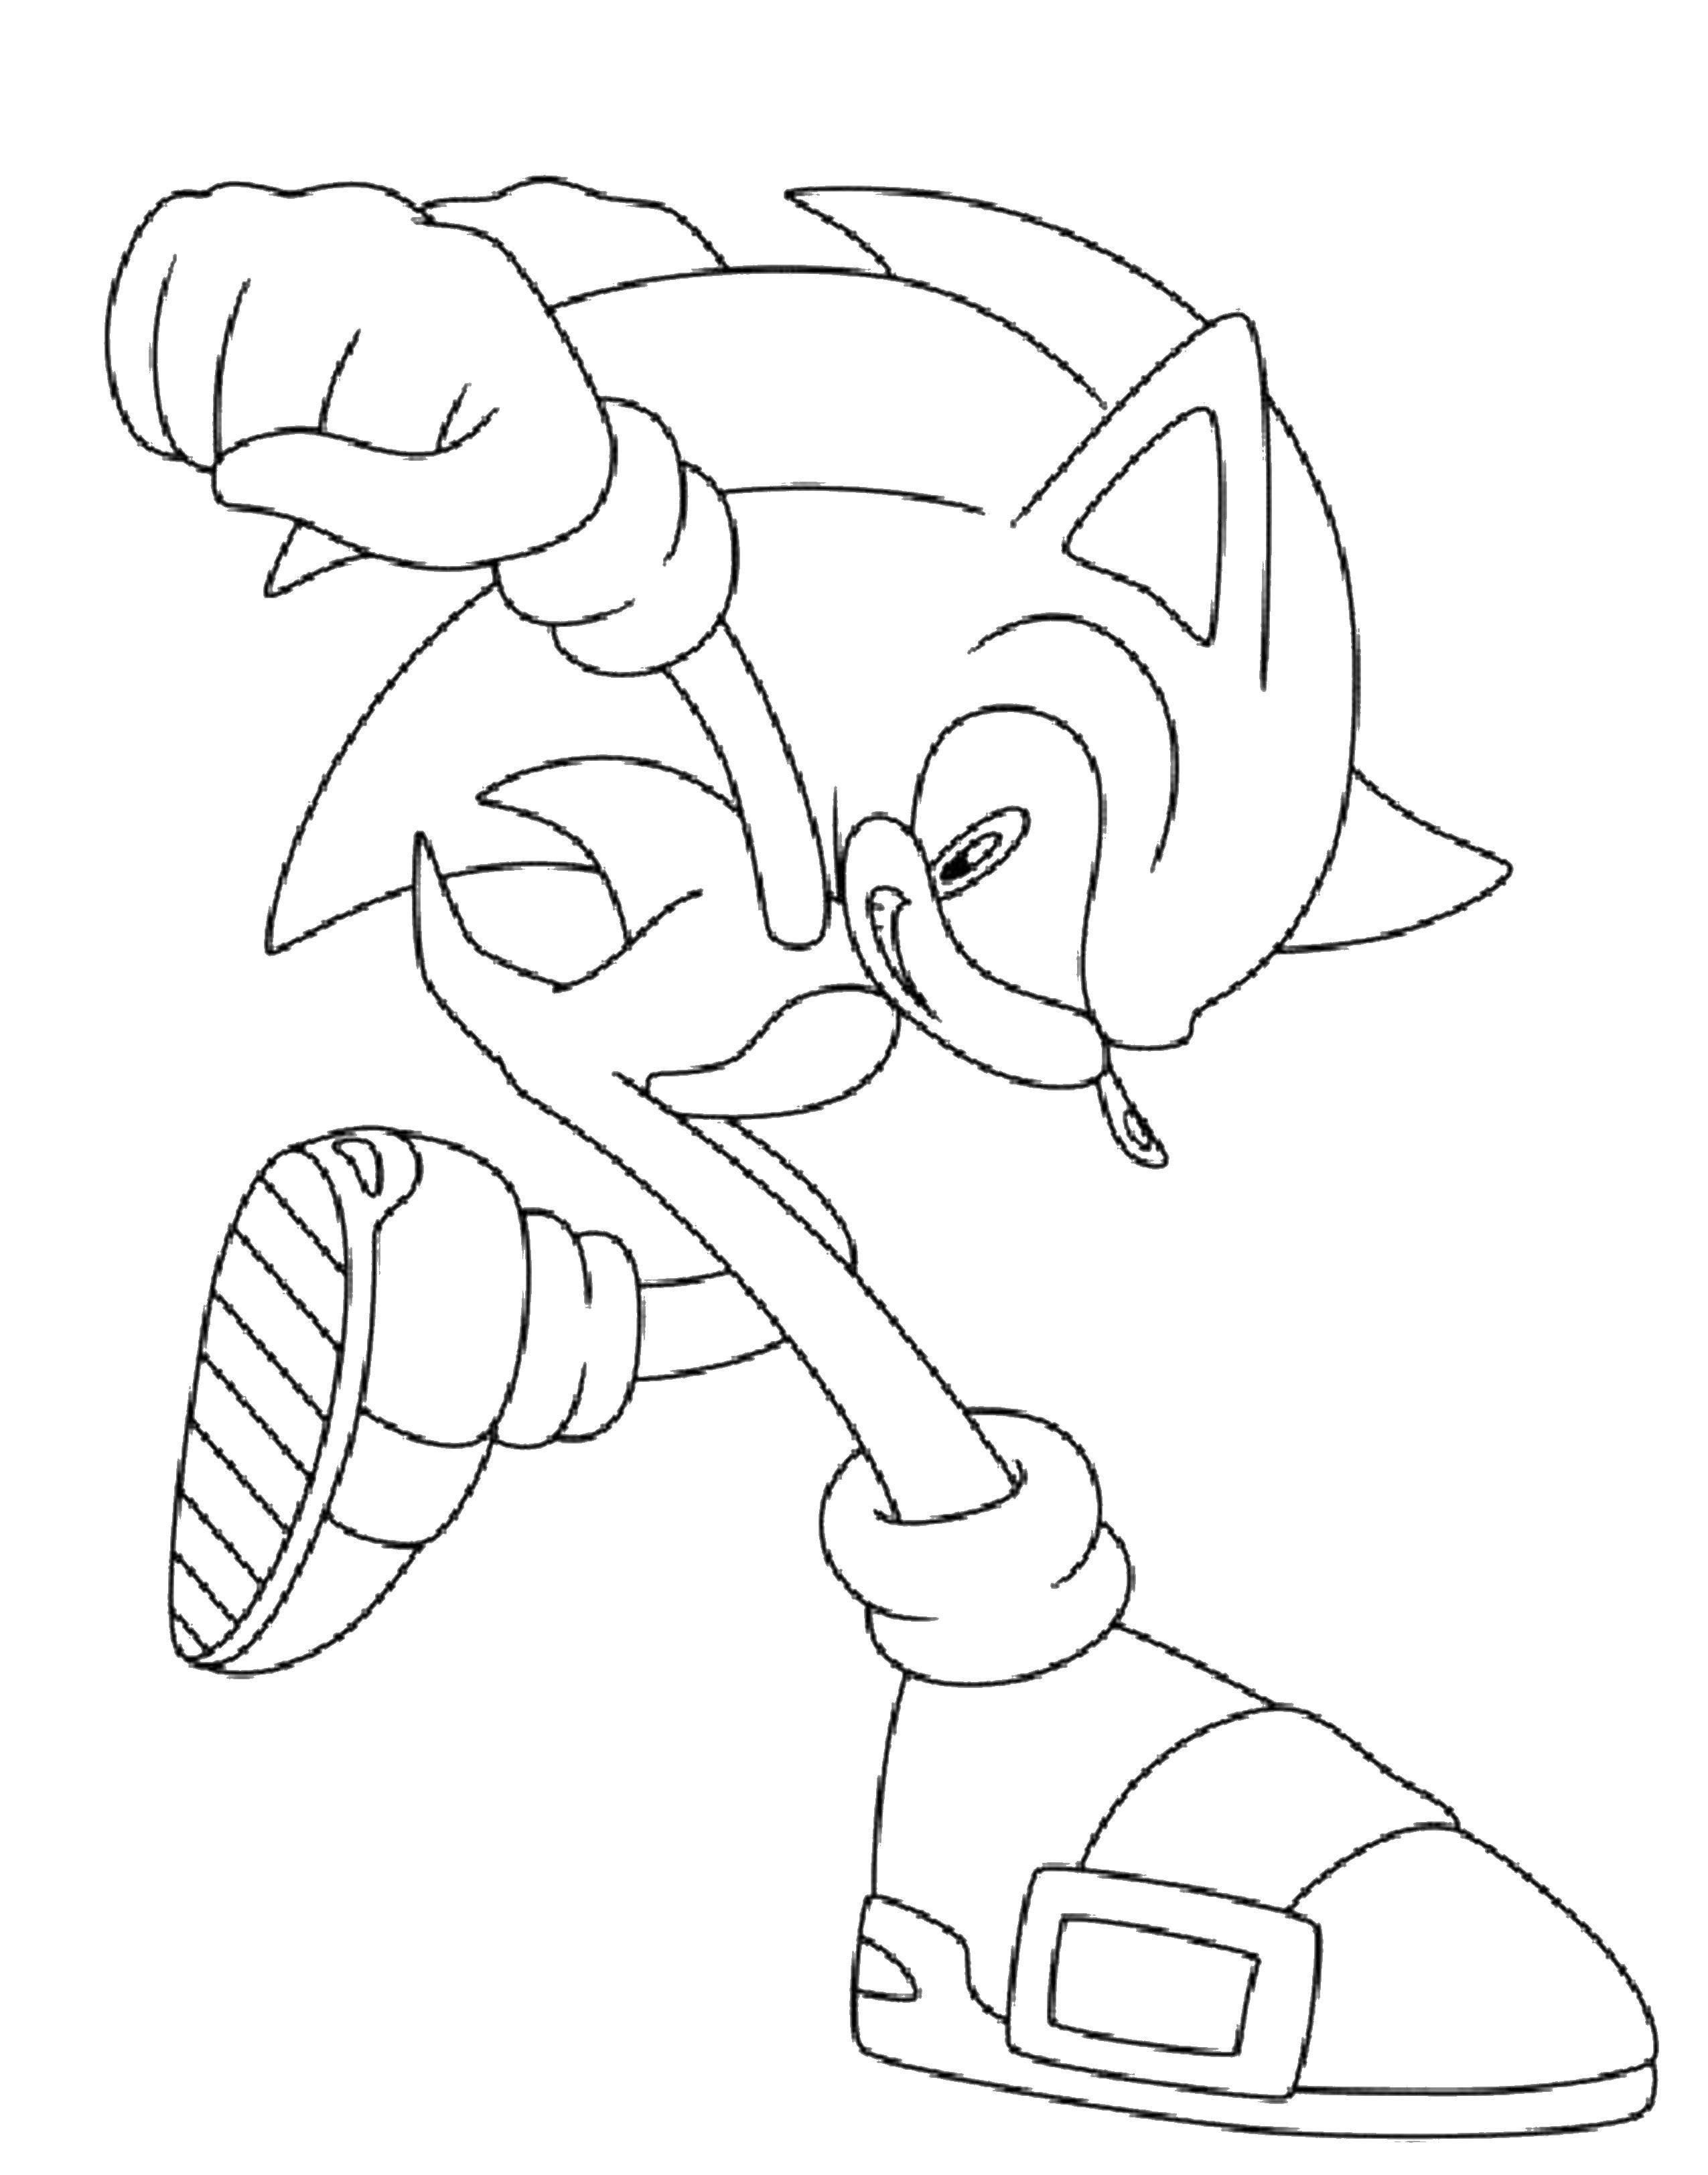 Coloring Sonic x. Category Cartoon character. Tags:  cartoons, sonic x, speed.